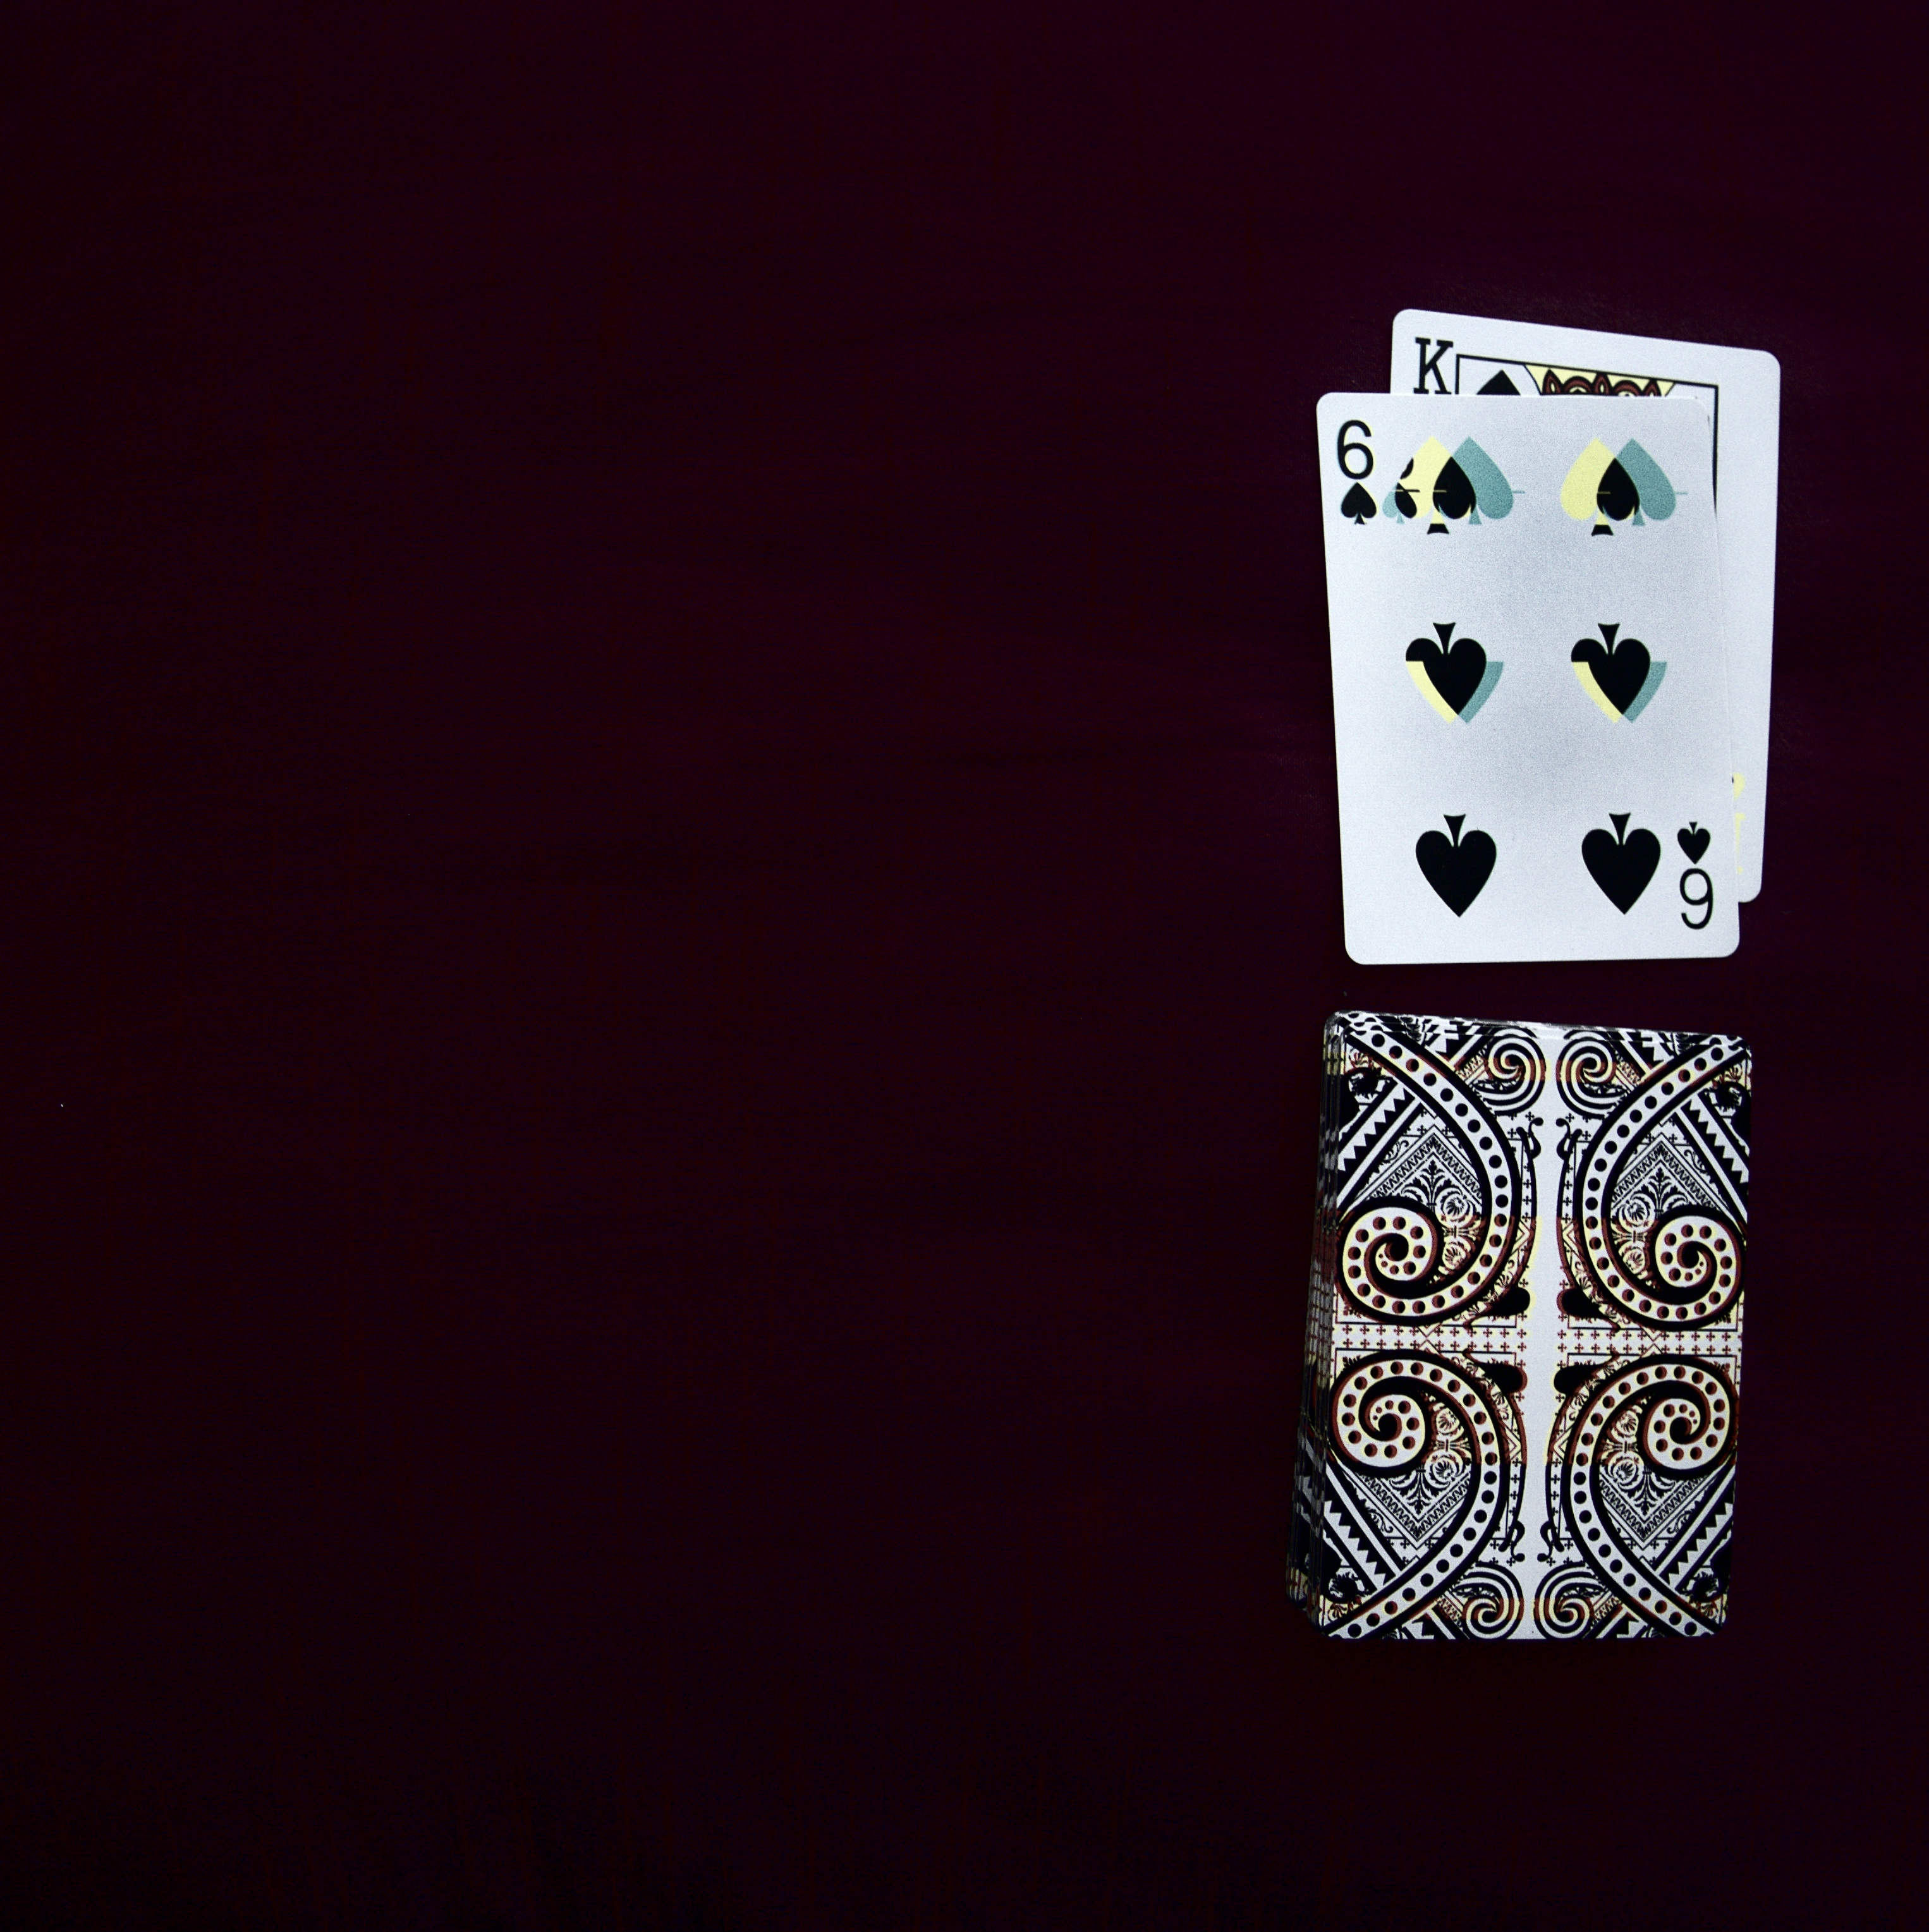 Glitched playing cards (Eric Kerr)